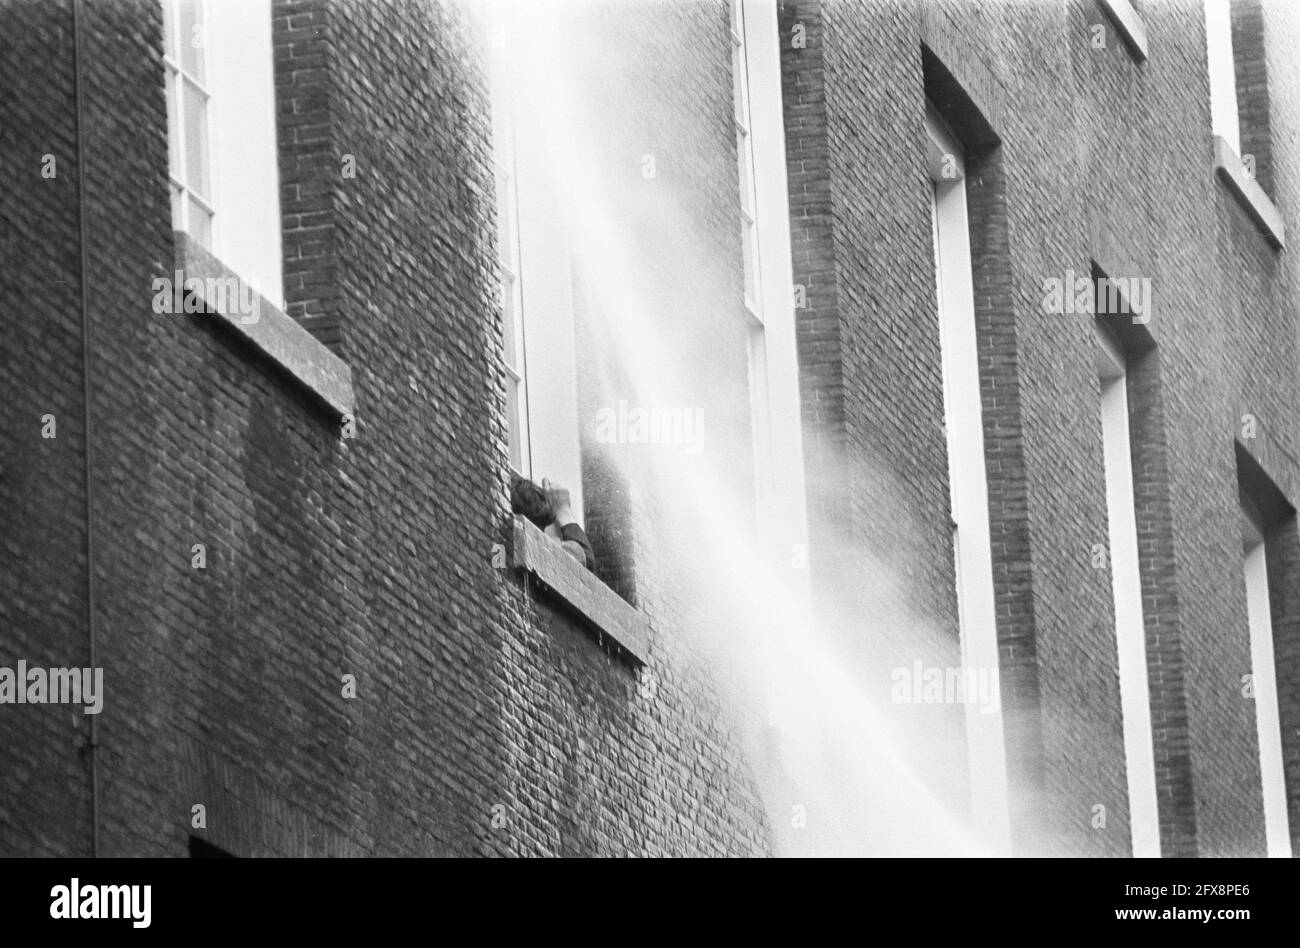 Occupation Maagdenhuis Amsterdam, by students police on roof Maagdenhuis, looking out the windows occupiers, May 20, 1969, POLICE, occupations, students, The Netherlands, 20th century press agency photo, news to remember, documentary, historic photography 1945-1990, visual stories, human history of the Twentieth Century, capturing moments in time Stock Photo